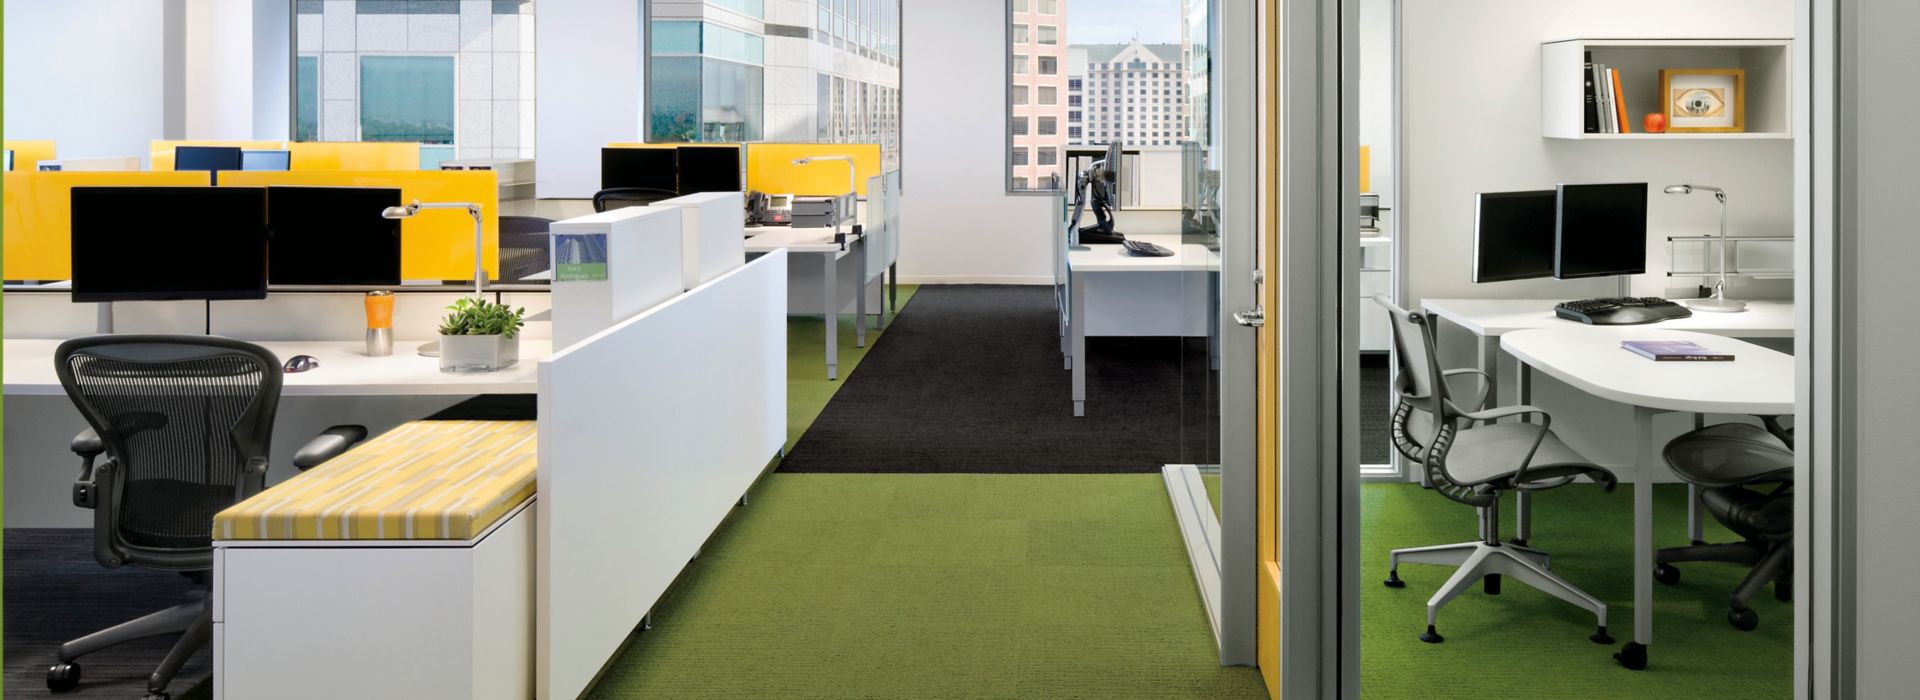 Interface Monochrome and Striation carpet tile in walkway of office with multiple open offices and a private office image number 1